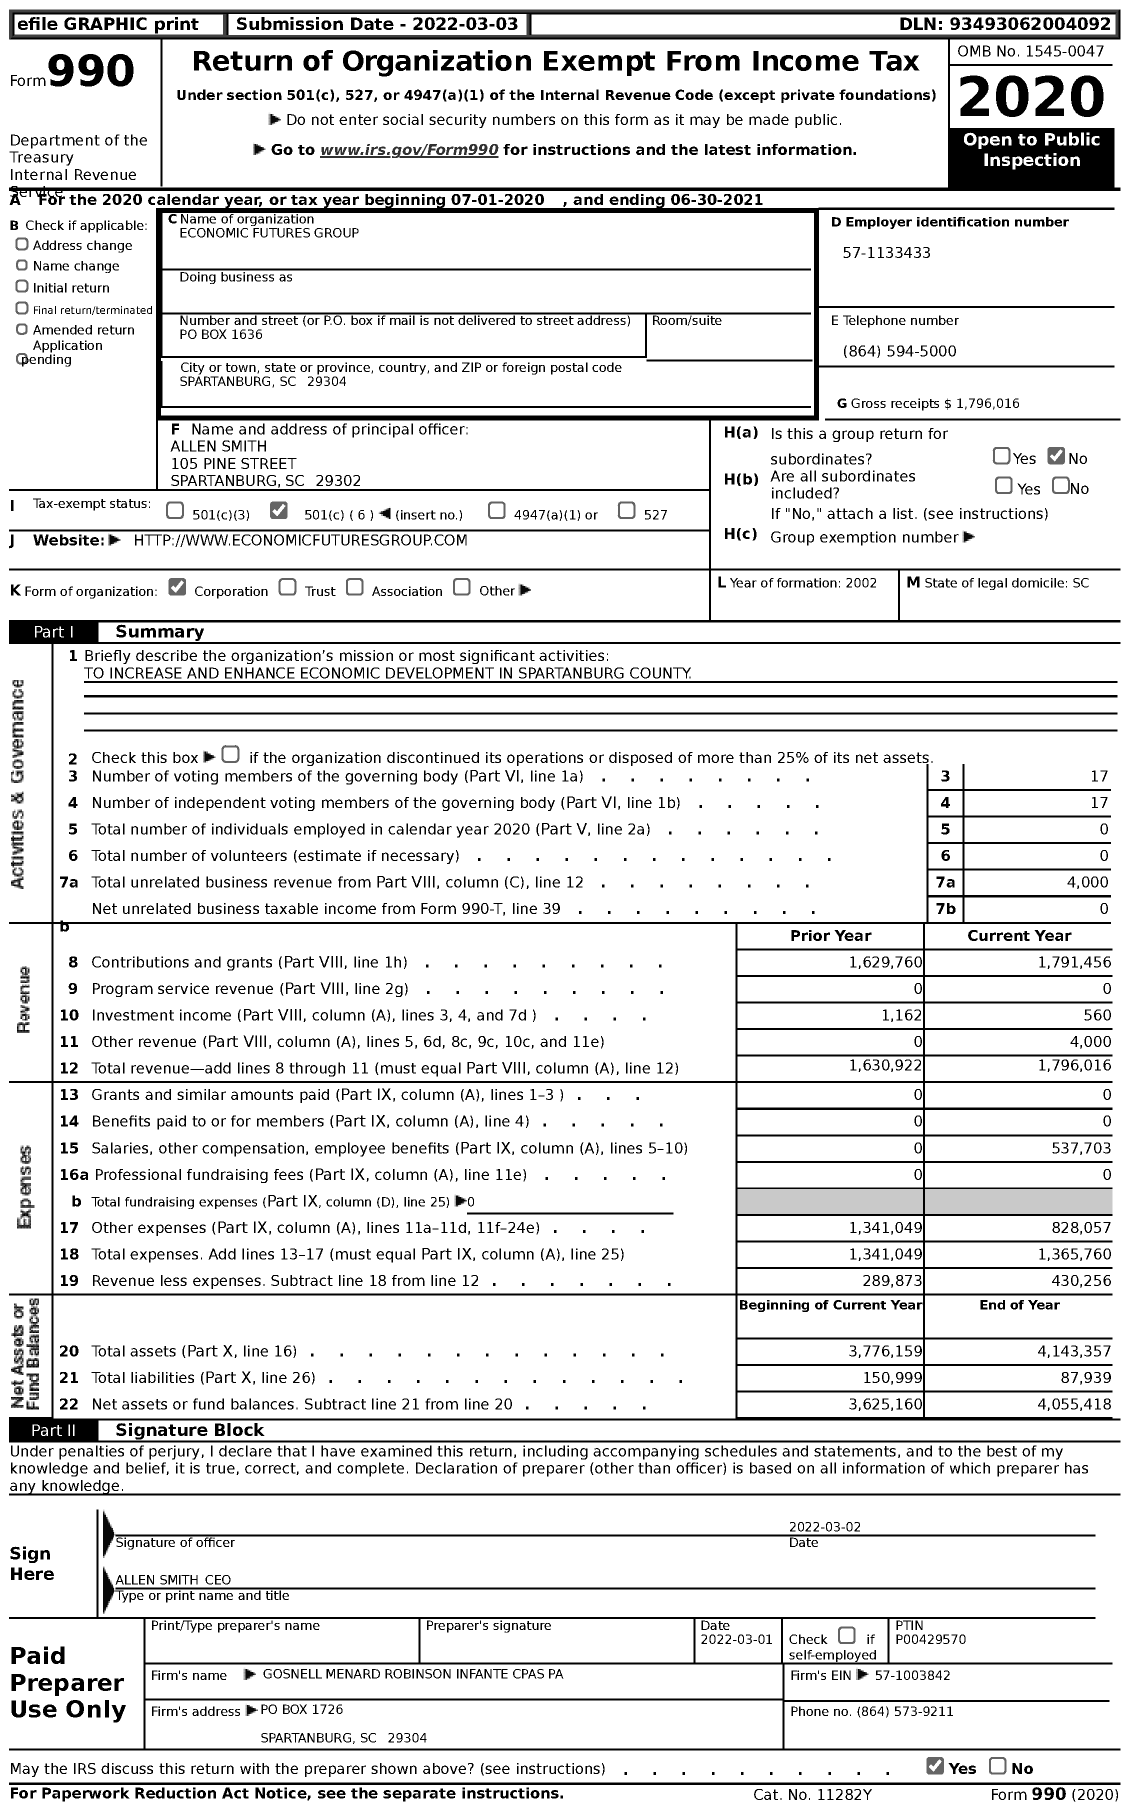 Image of first page of 2020 Form 990 for Economic Futures Group (EFG)